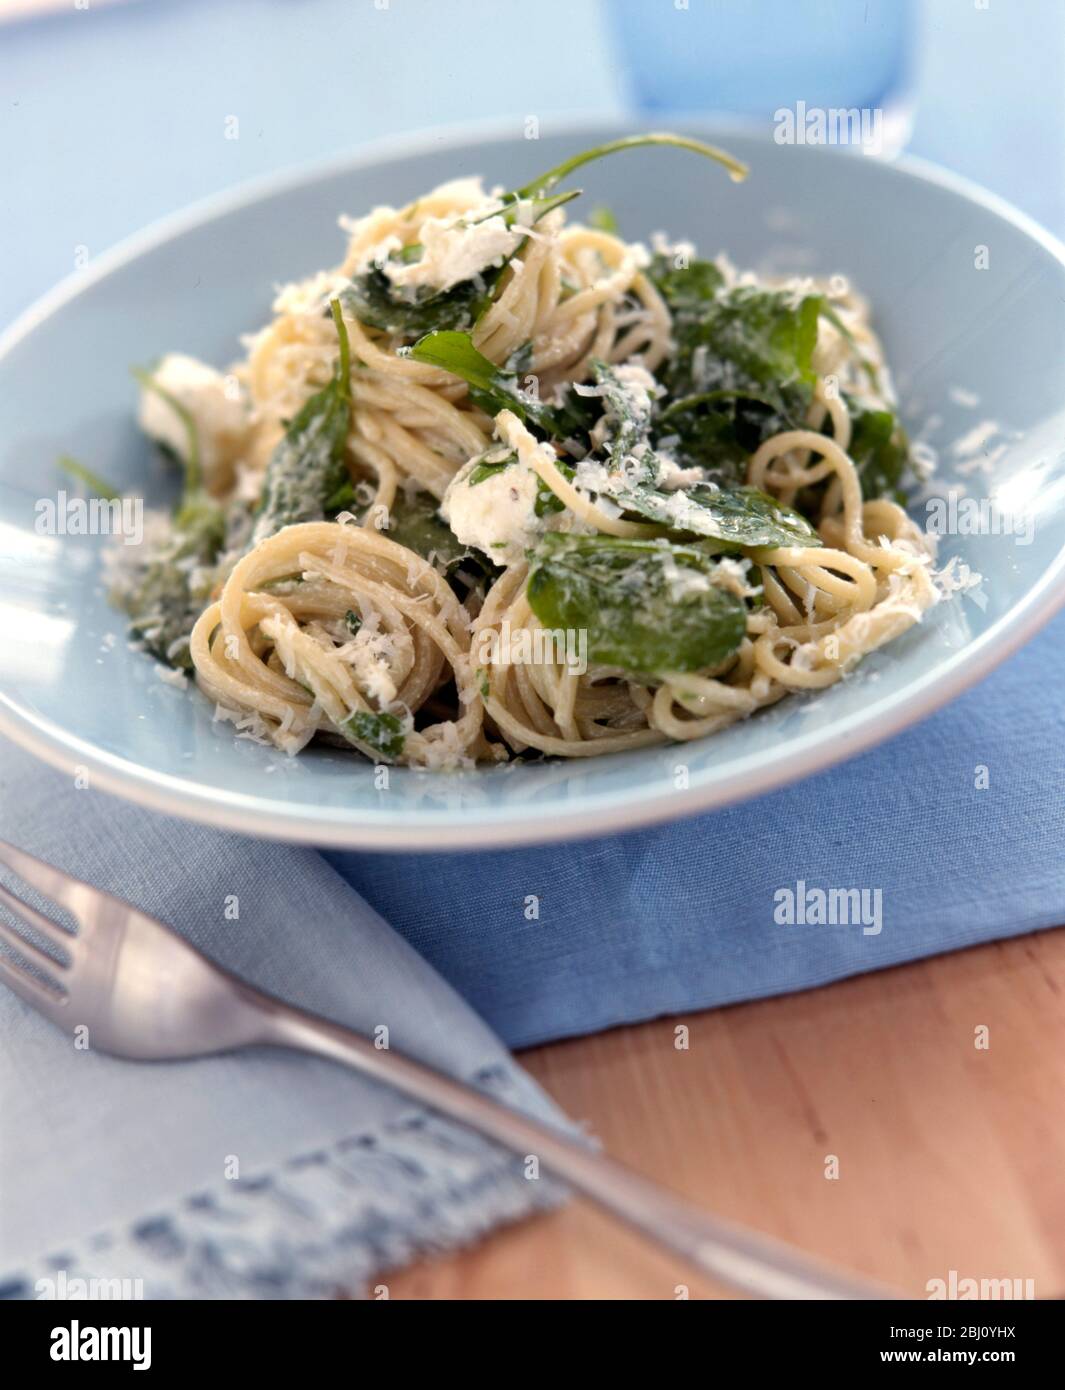 A pale blue ceramic bowl of spaghetti garnished with basil and grated parmesan on blue cloth - Stock Photo